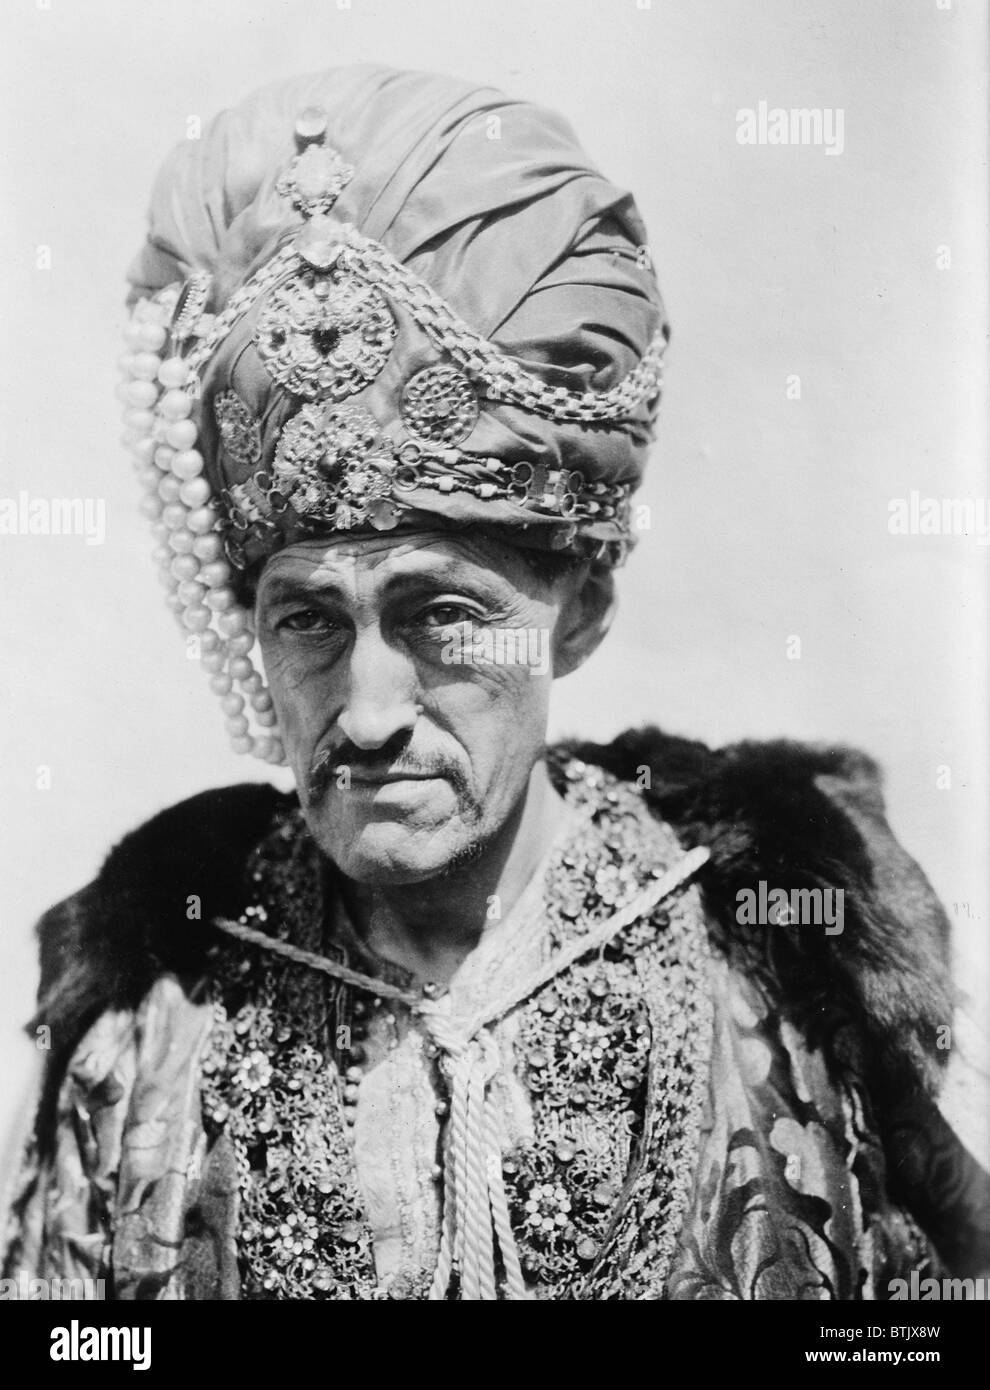 Sadakichi Hartmann (1867-1944), writer of German-Japanese ancestry, immigrated to the US as a child. The 'King of Bohemia' is dressed in an exotic costume. Ca. 1925. Stock Photo